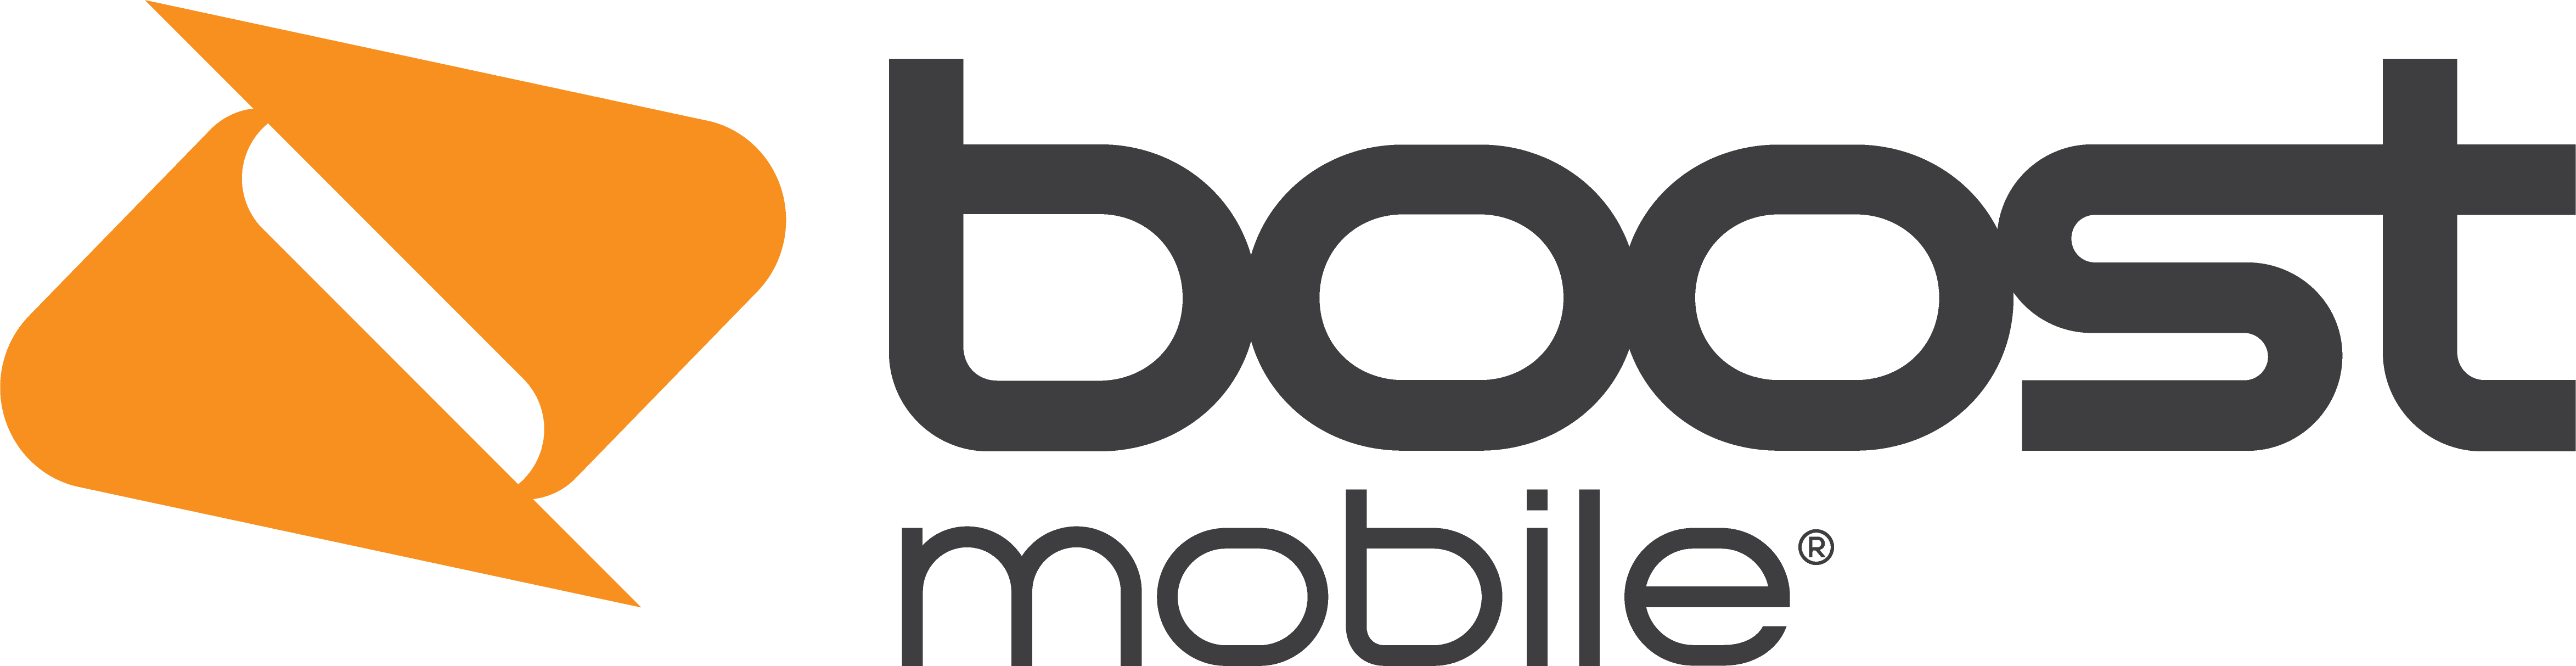 Boost mobile get 3 months free when you buy 3 months unlimited data, talk text - $90